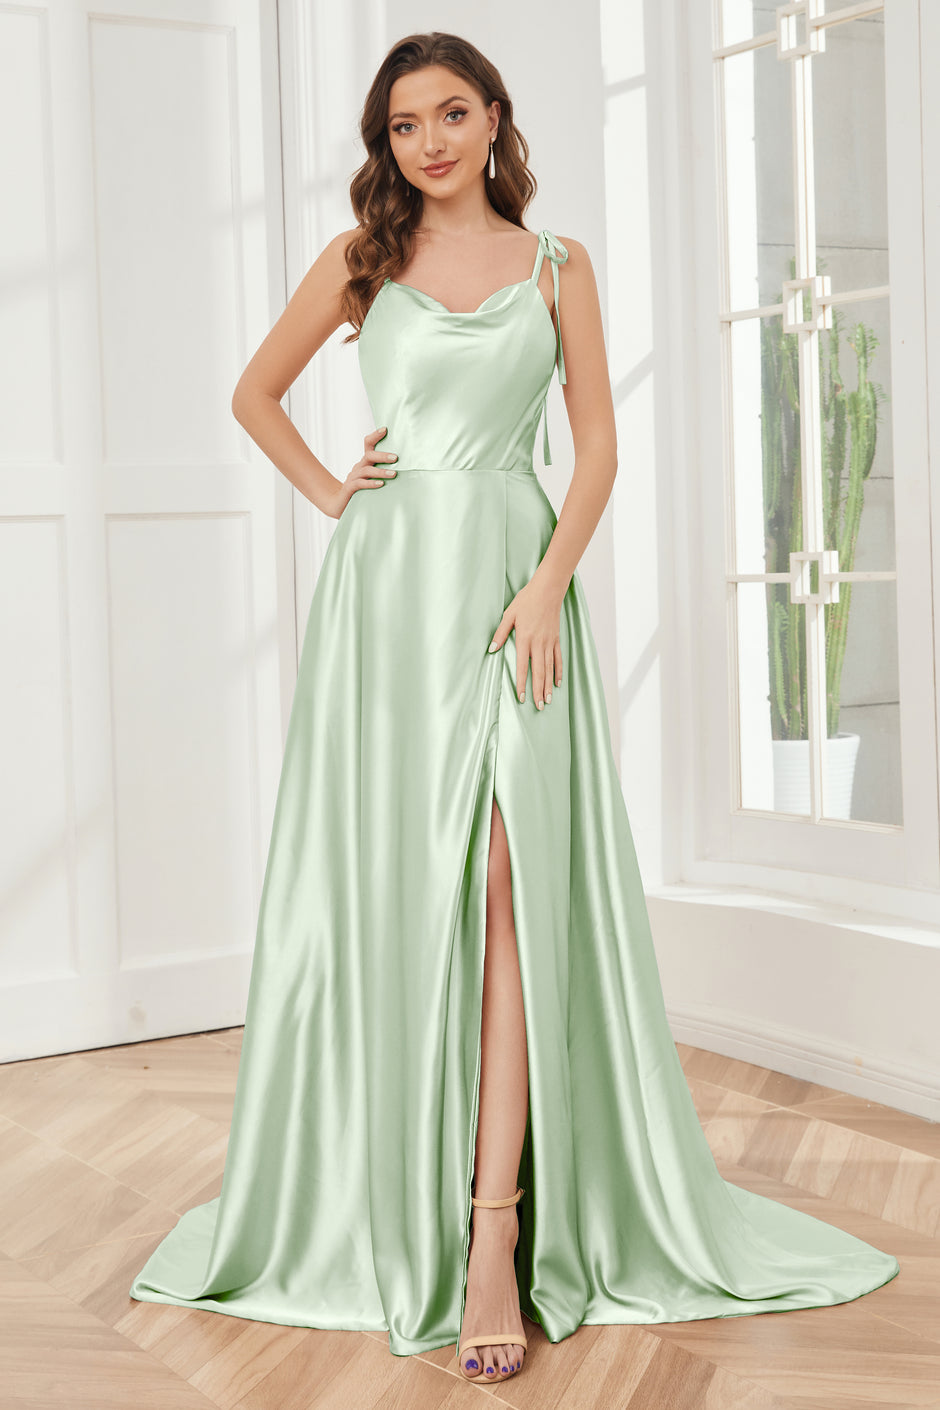 Buy Cheap Bridesmaid Dresses Online 丨 Ombreprom